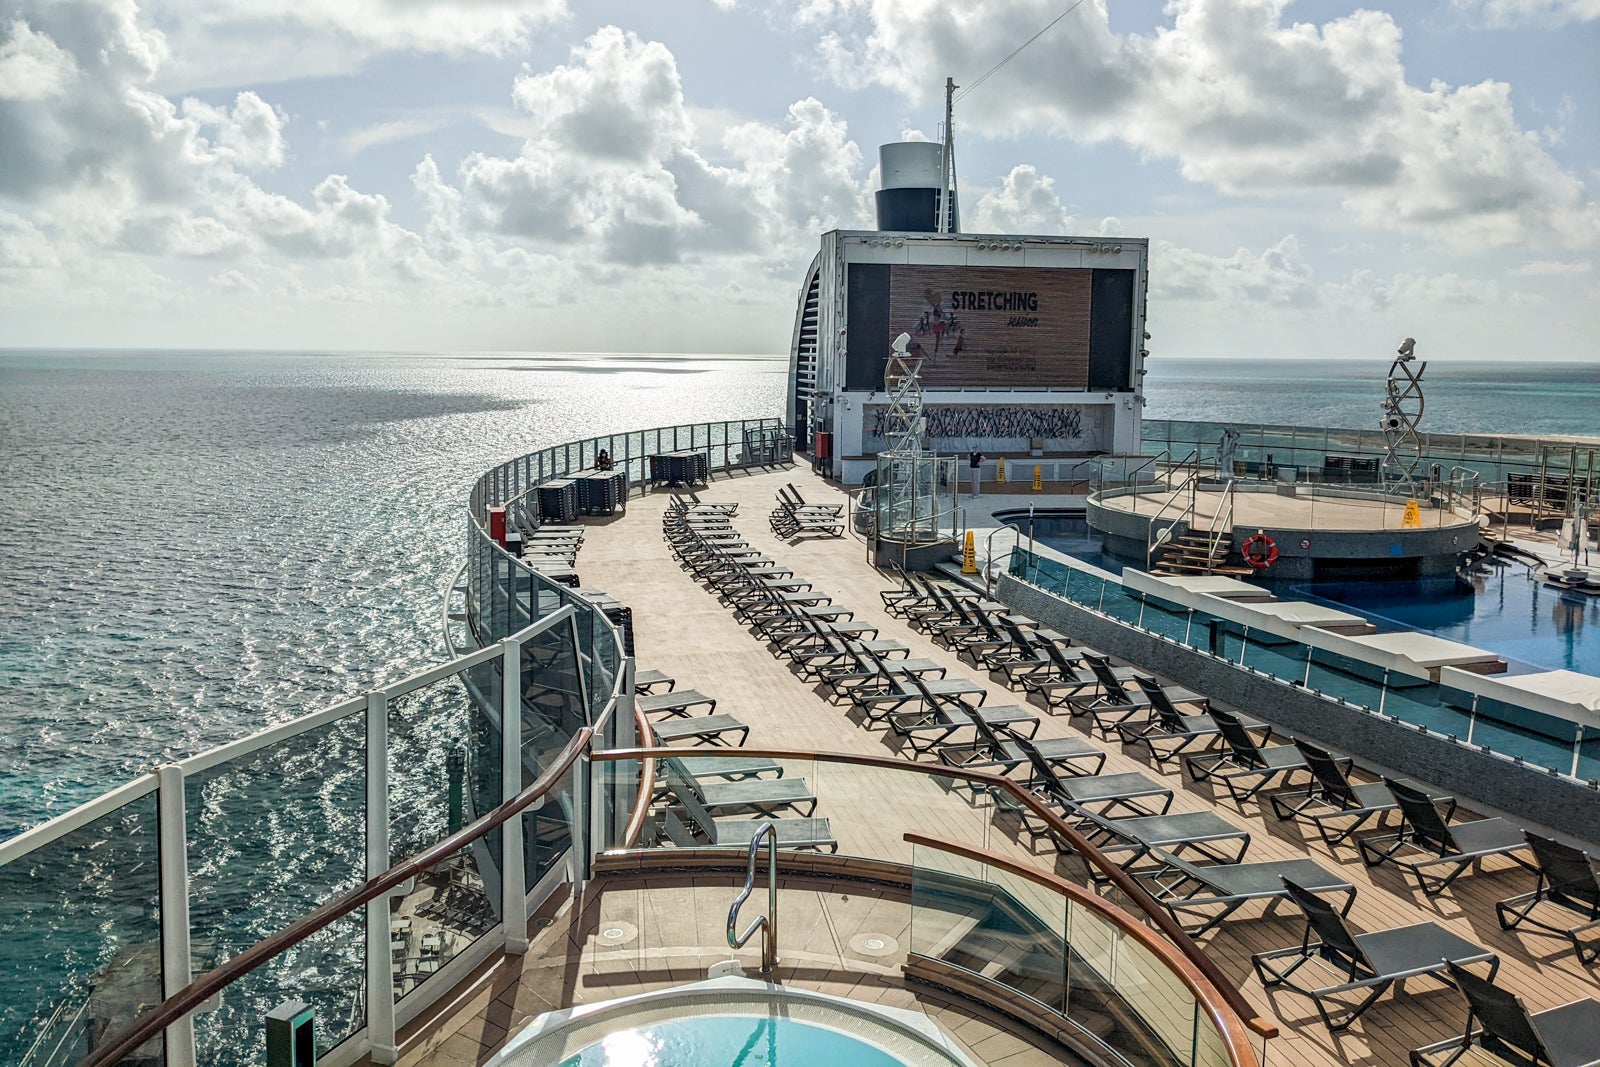 Top deck of MSC Seashore with lounge chairs and movie screen